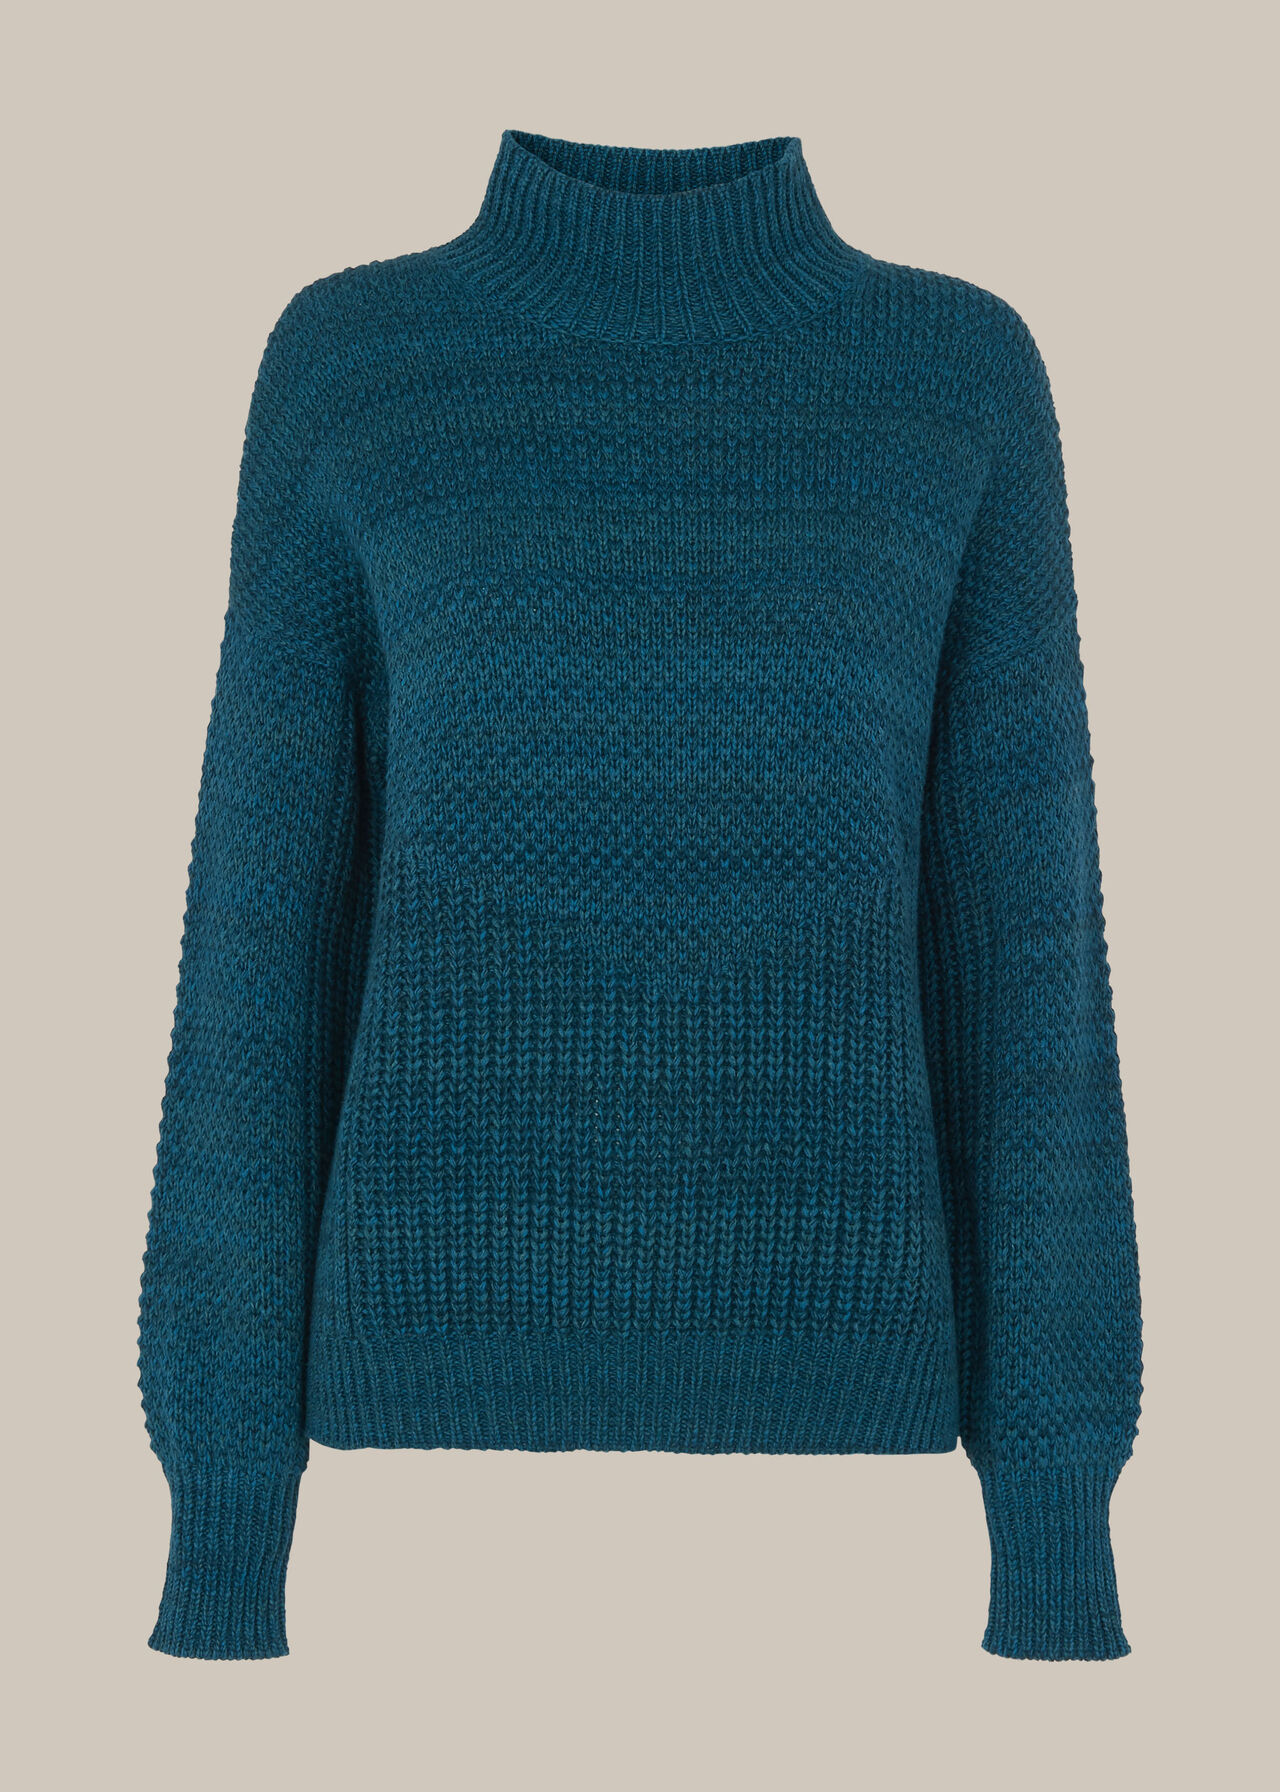 Teal Moss Stitch Textured Knit | WHISTLES | Whistles UK